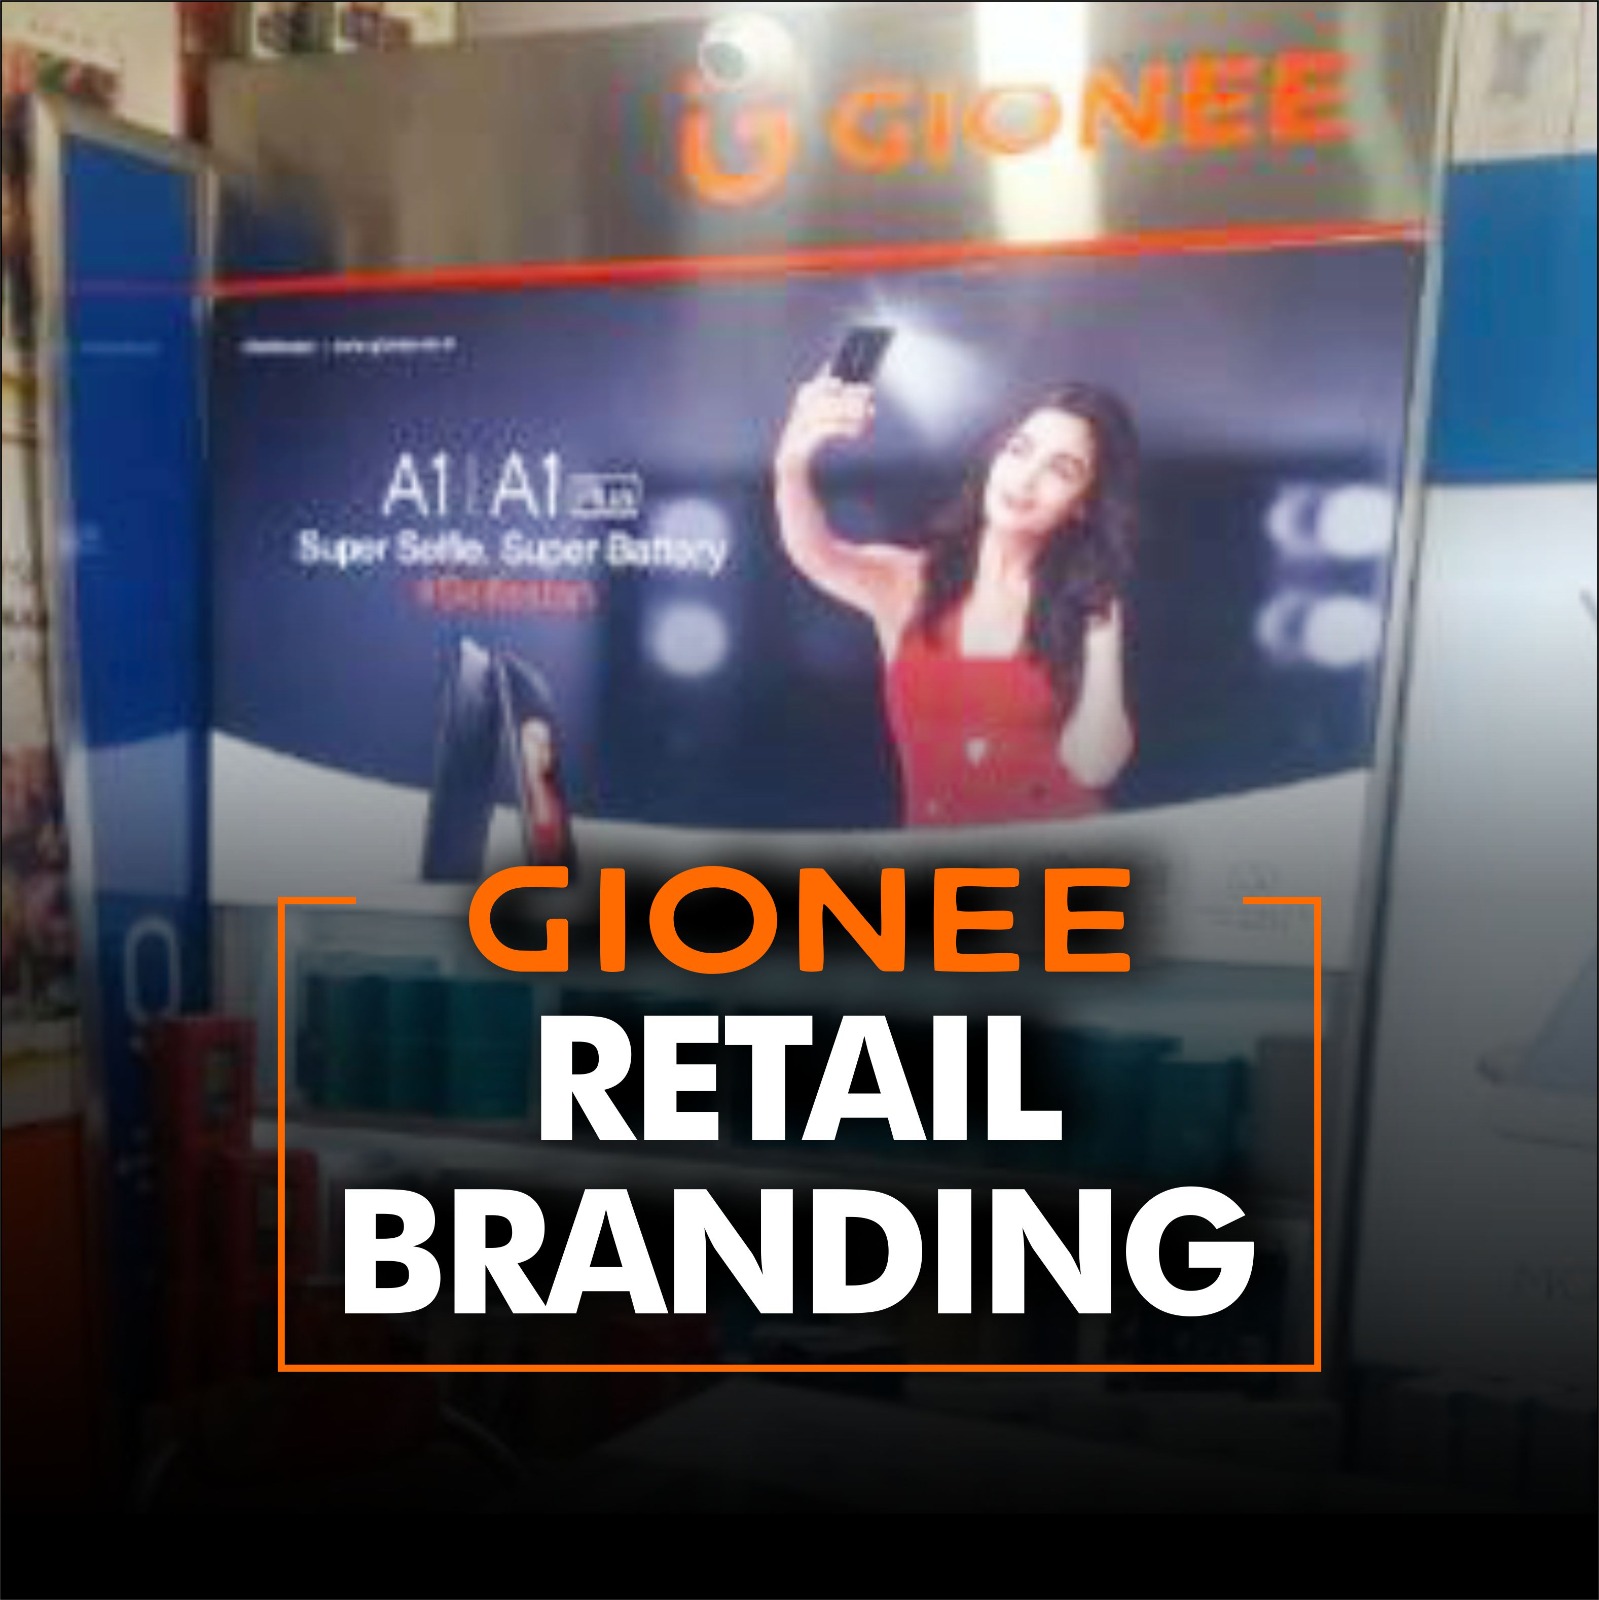 Gionee Retail Branding by Ascent